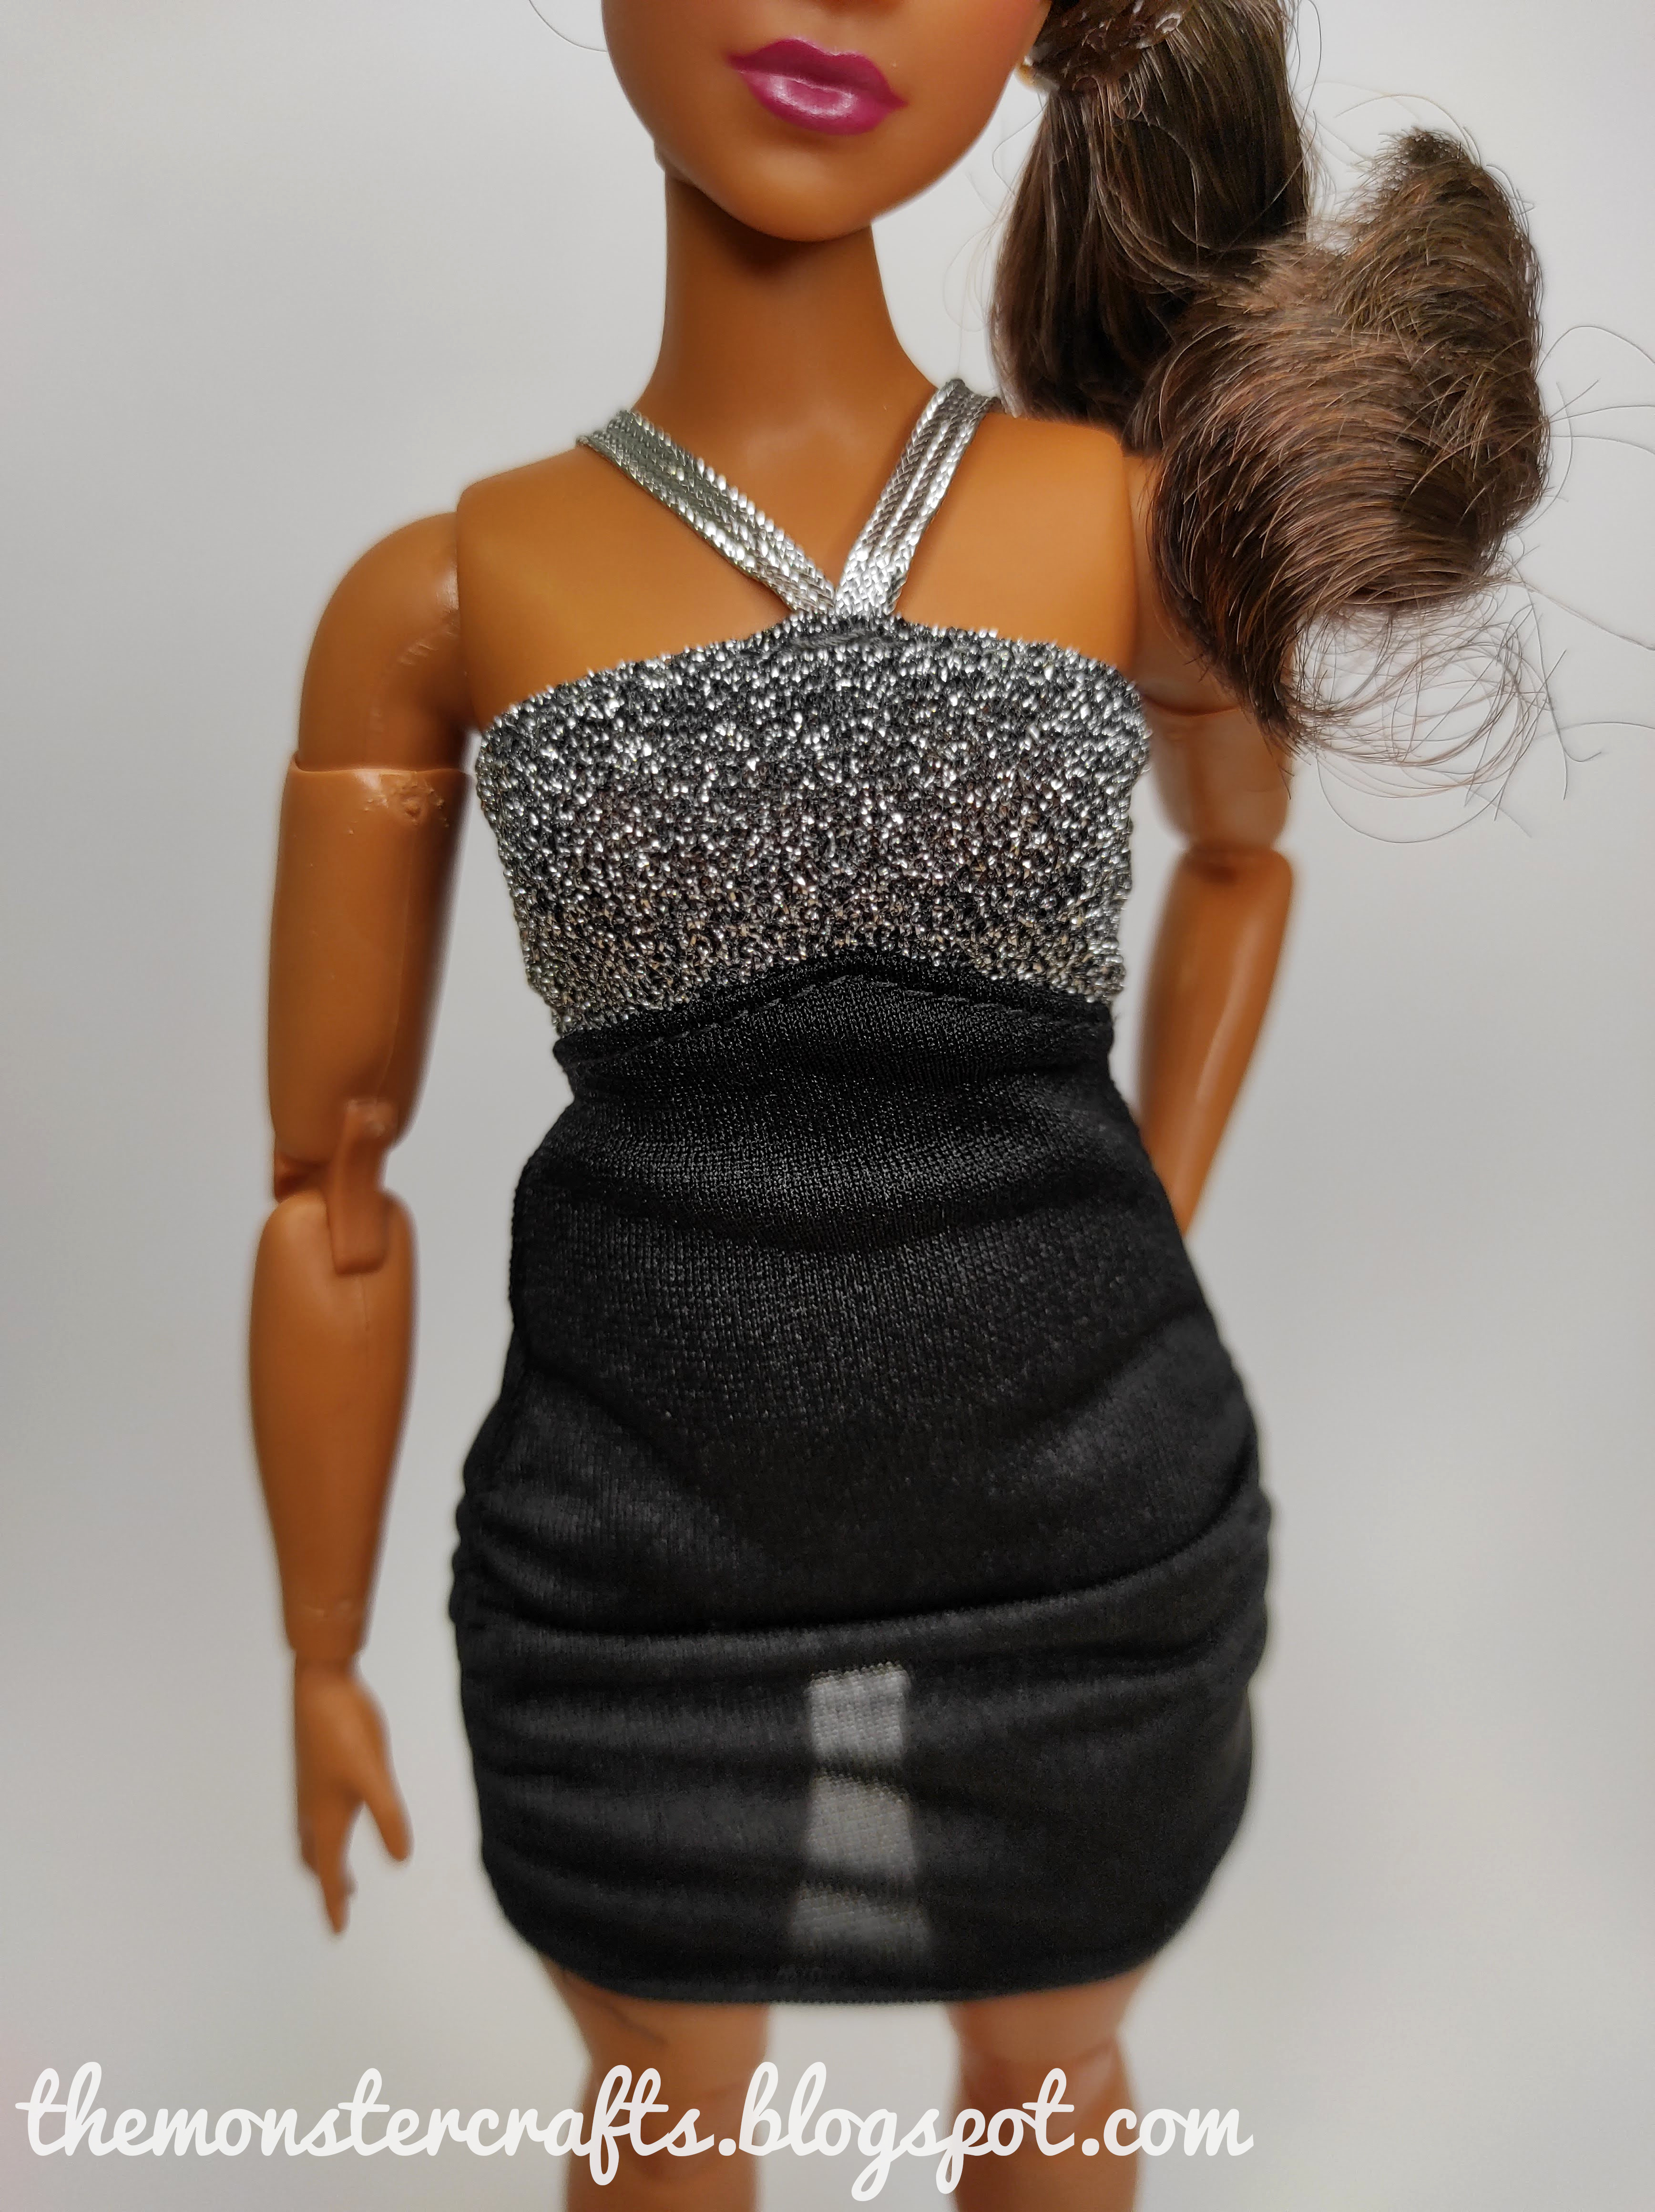 Curvy Barbie wardrobe find - details in comments : r/Barbie